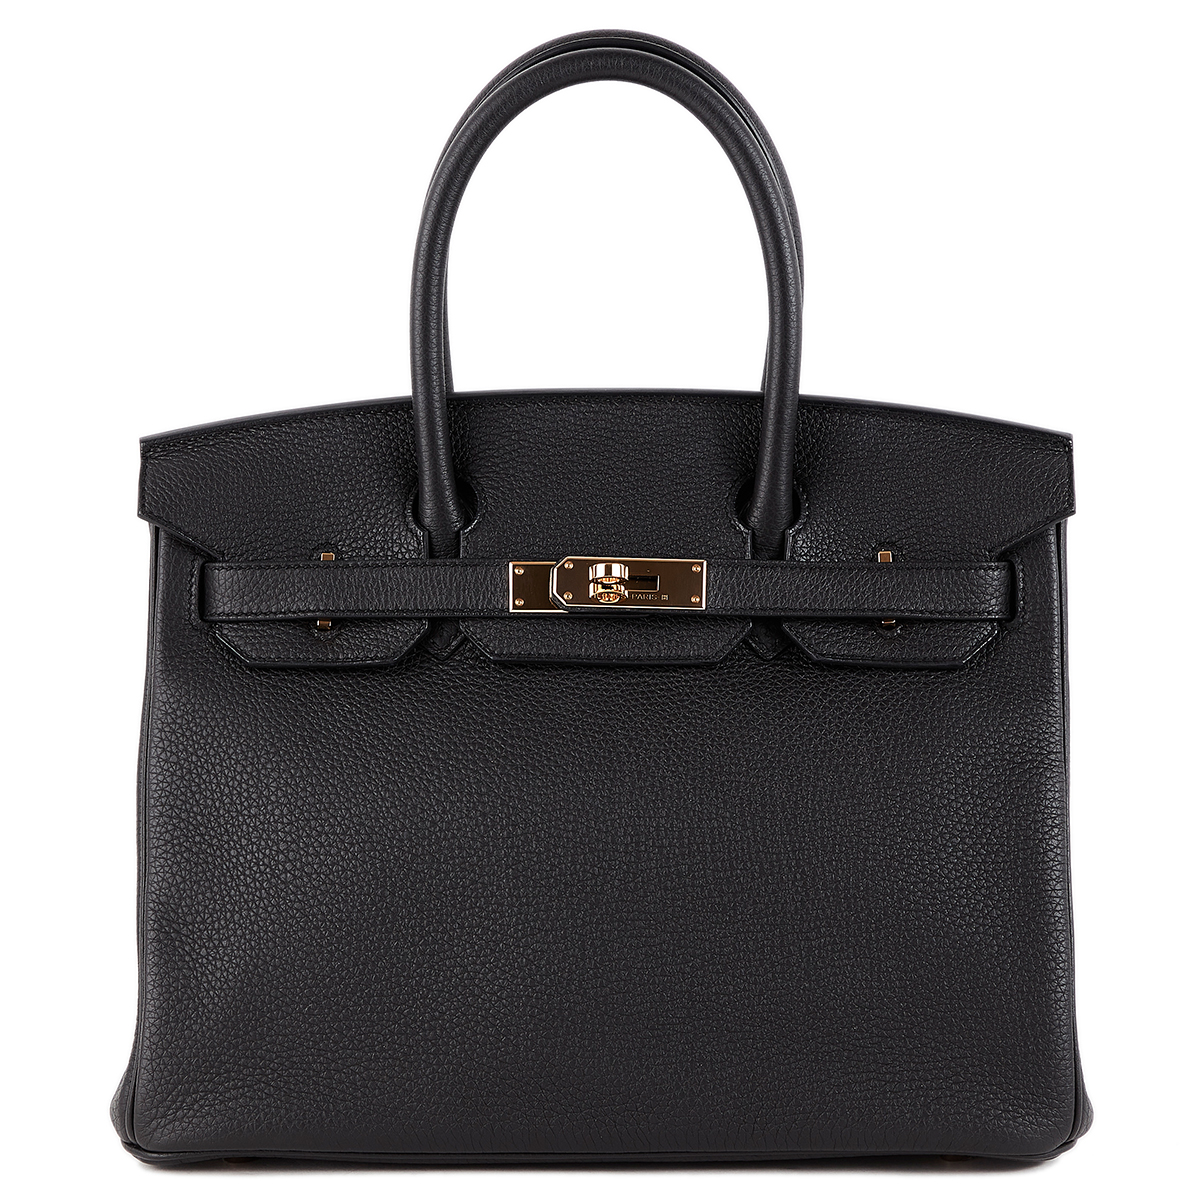 Ginza Xiaoma - Classic Black Birkin 30 in Togo leather with Gold hardware.  👯 We have this combo in size 25 and 35 as well. 🎼 - Stamp Square I. JPY  1,490,400 including tax.